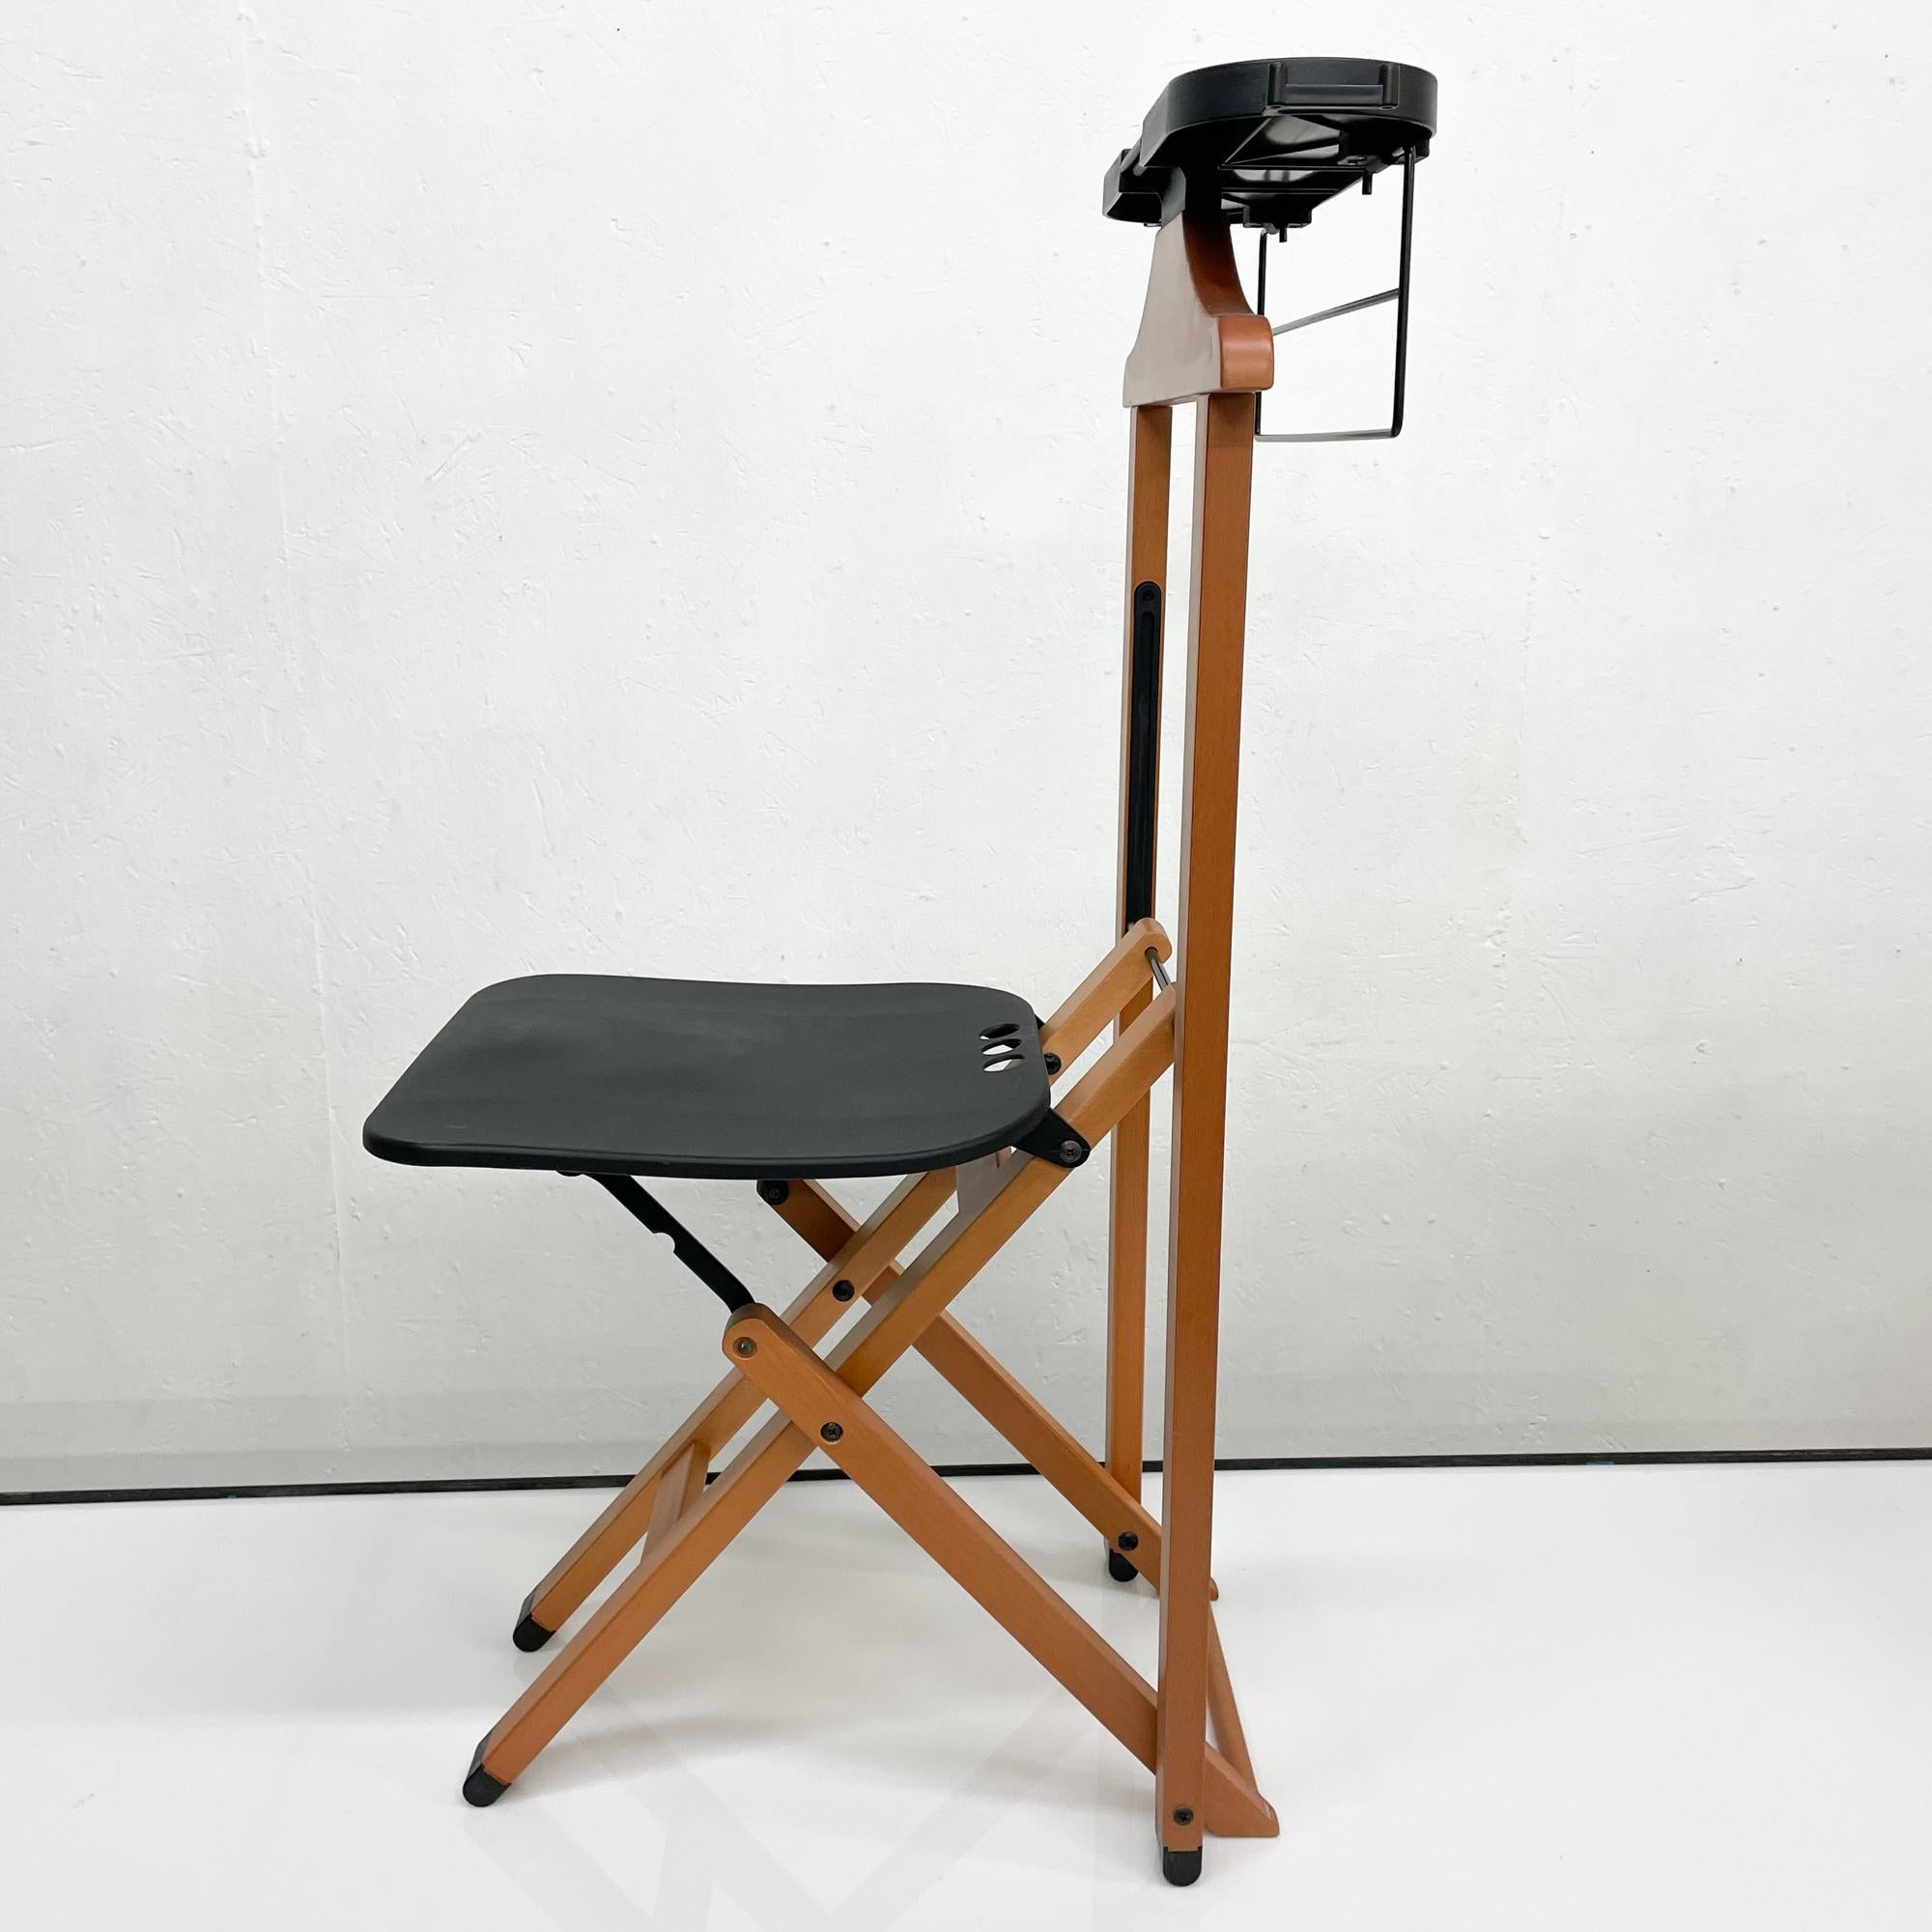 1990s Foppapedretti Gentleman's Suit Chair Folding Valet Stand Italy 2